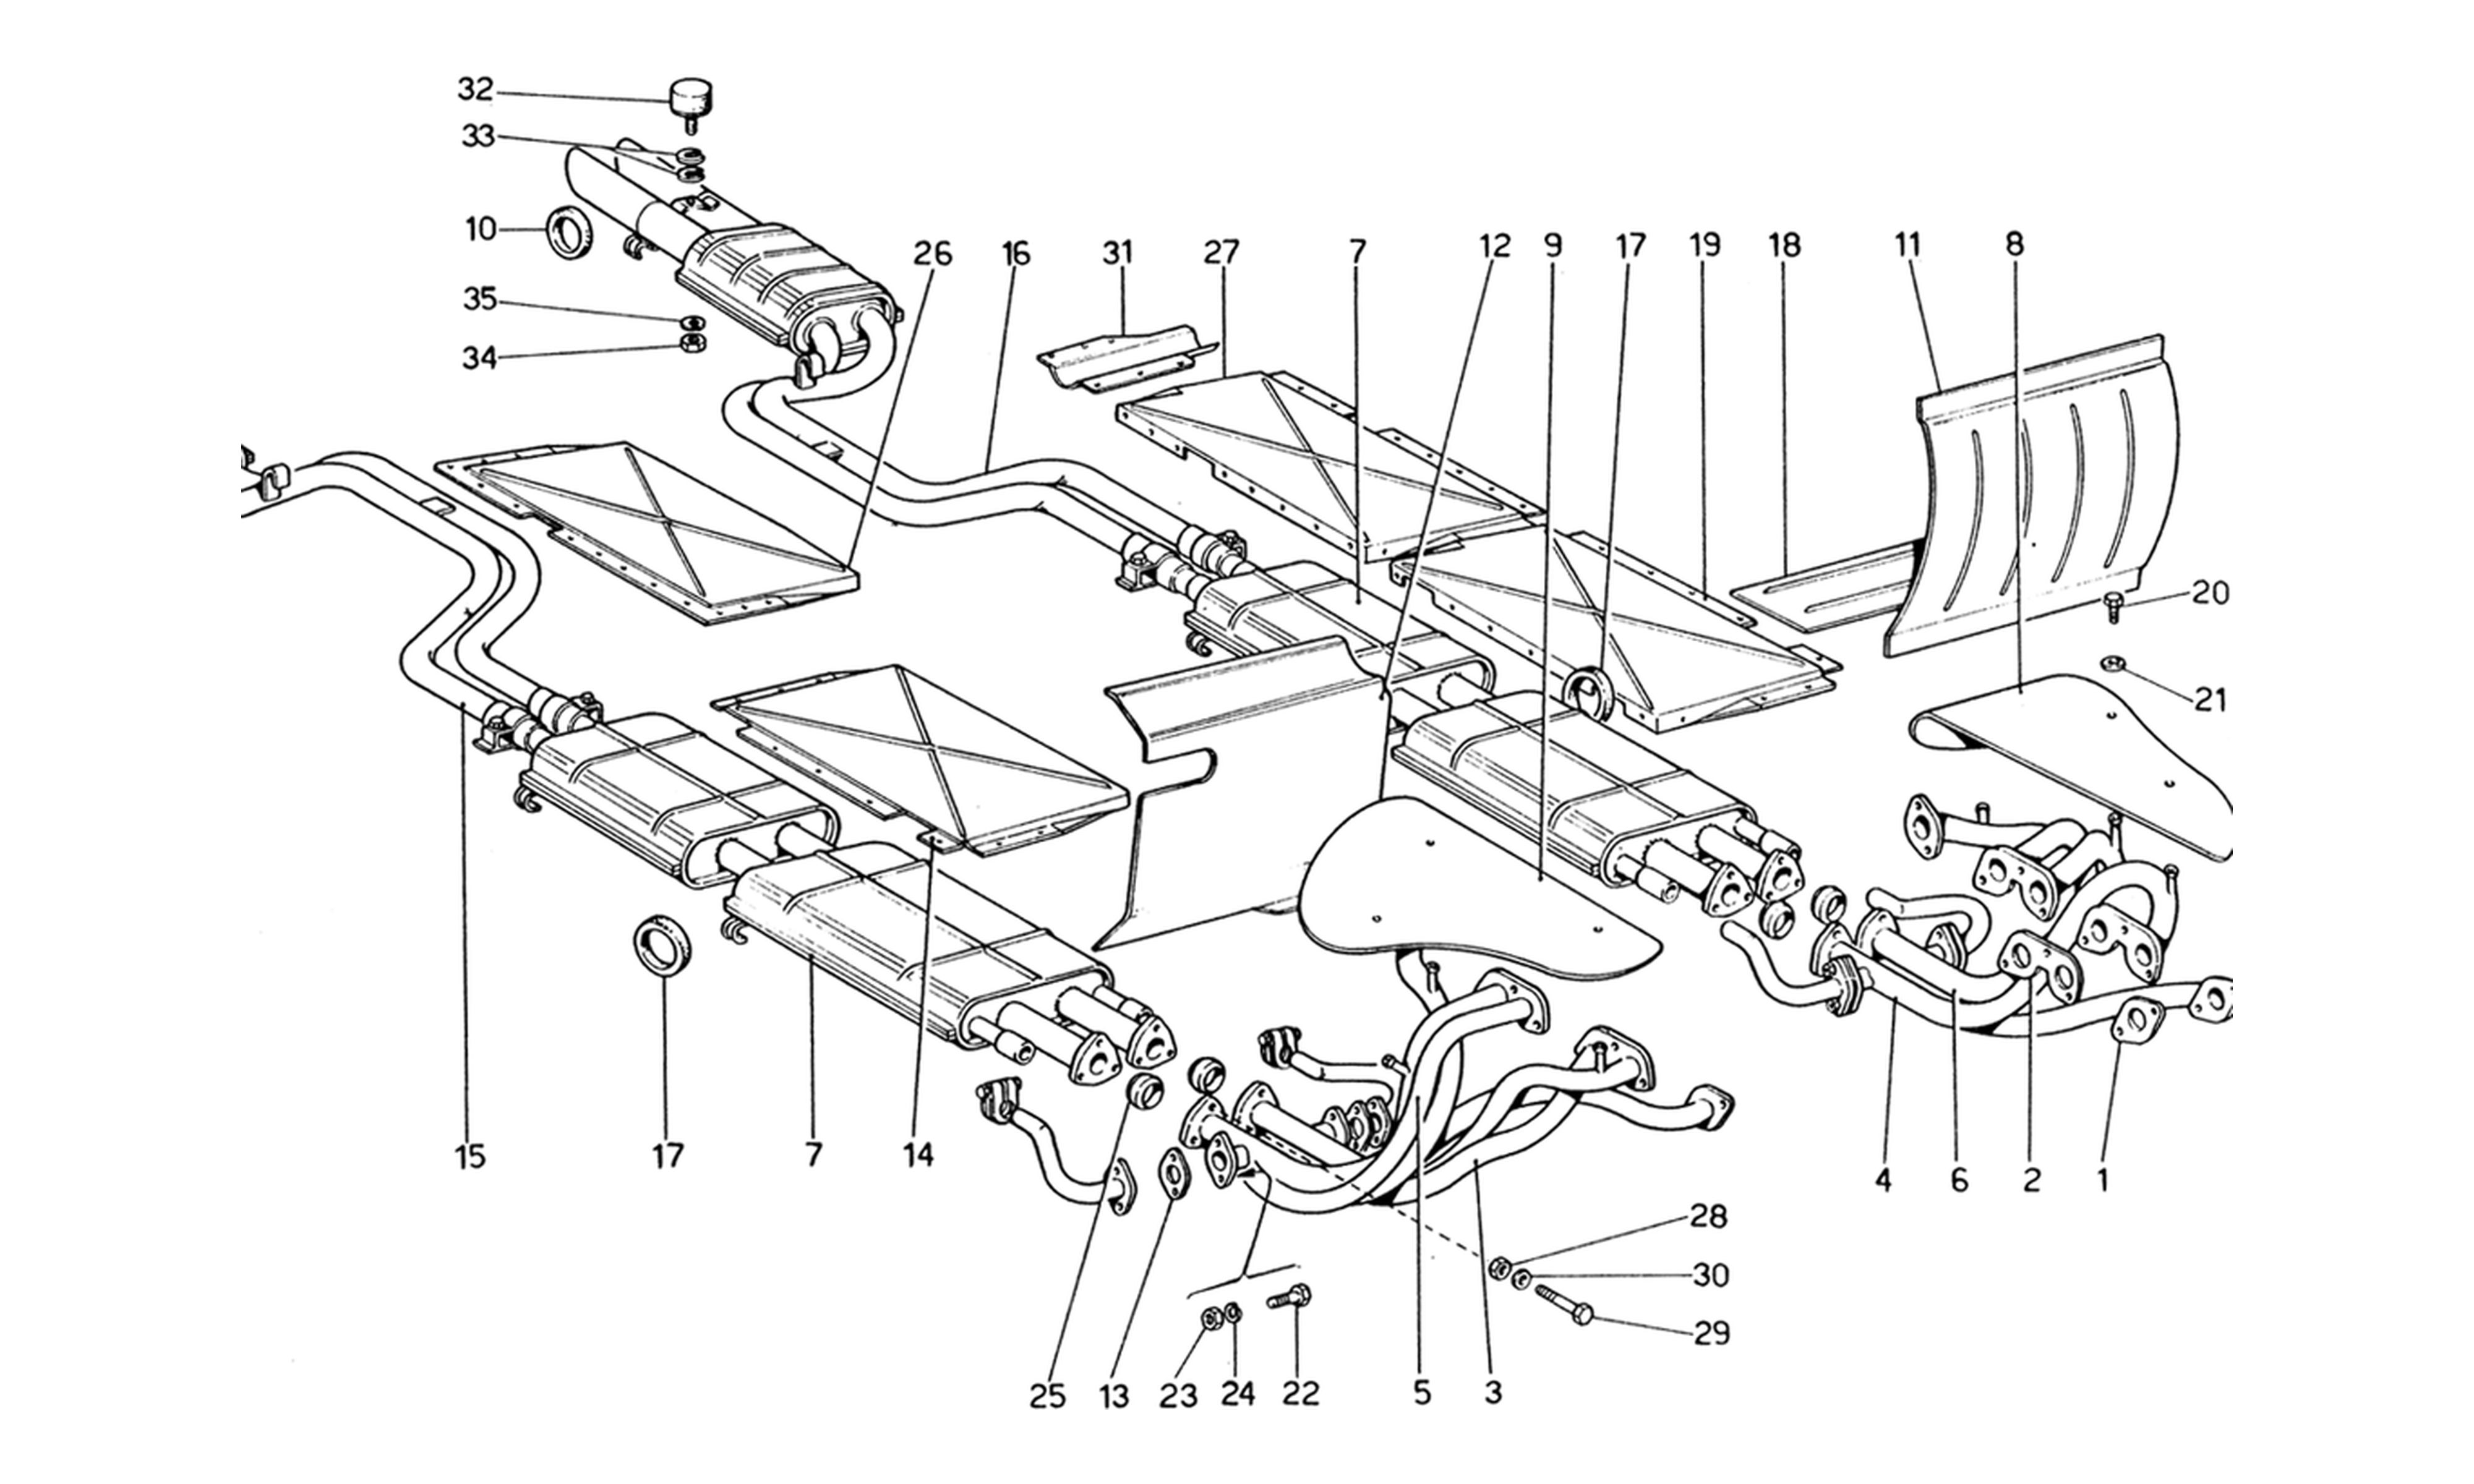 Schematic: Exhaust Manifold And Piping